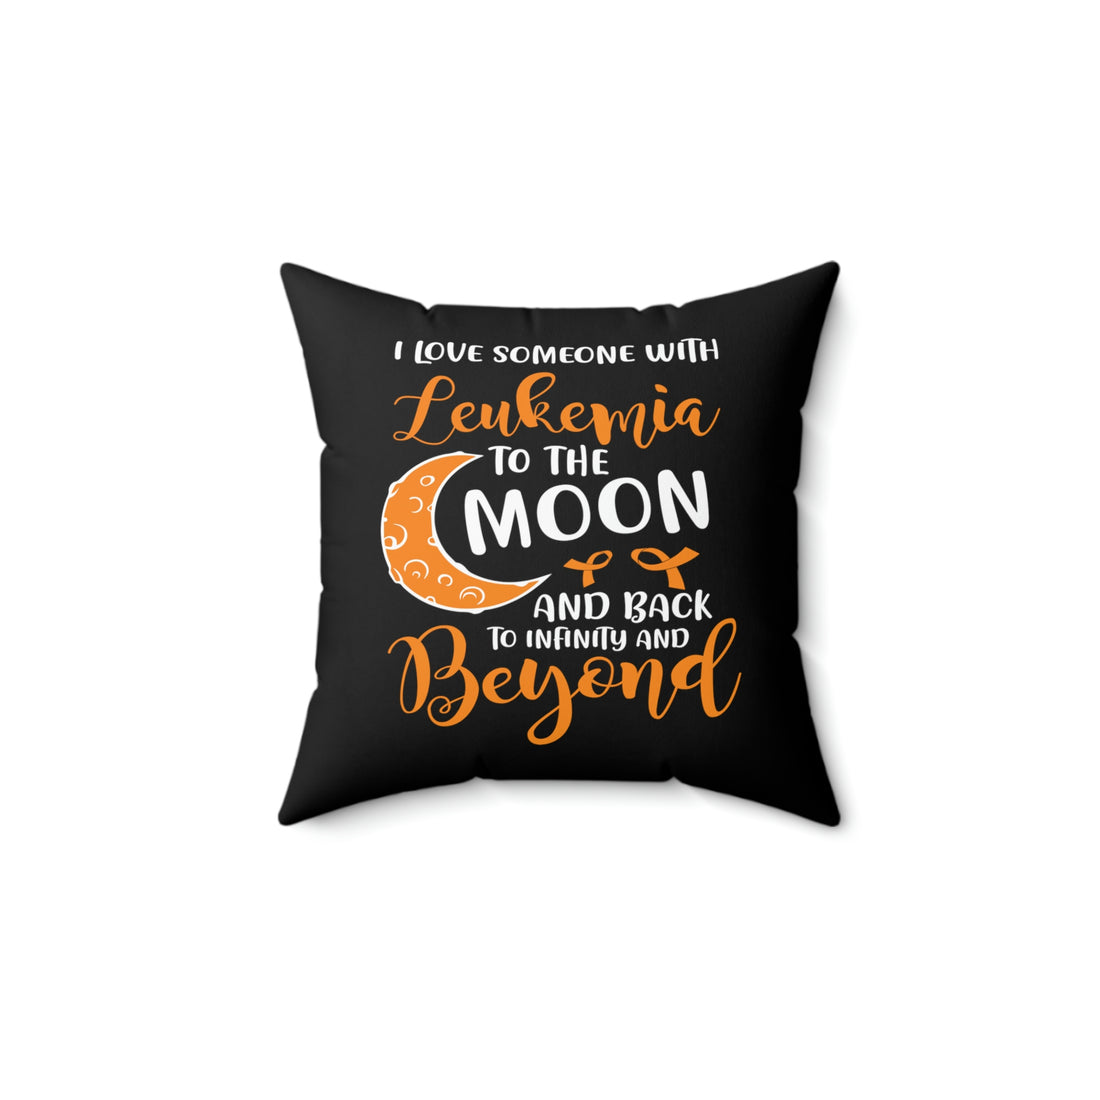 I Love Someone With Leukemia To The Moon And Back -  Black Pillow